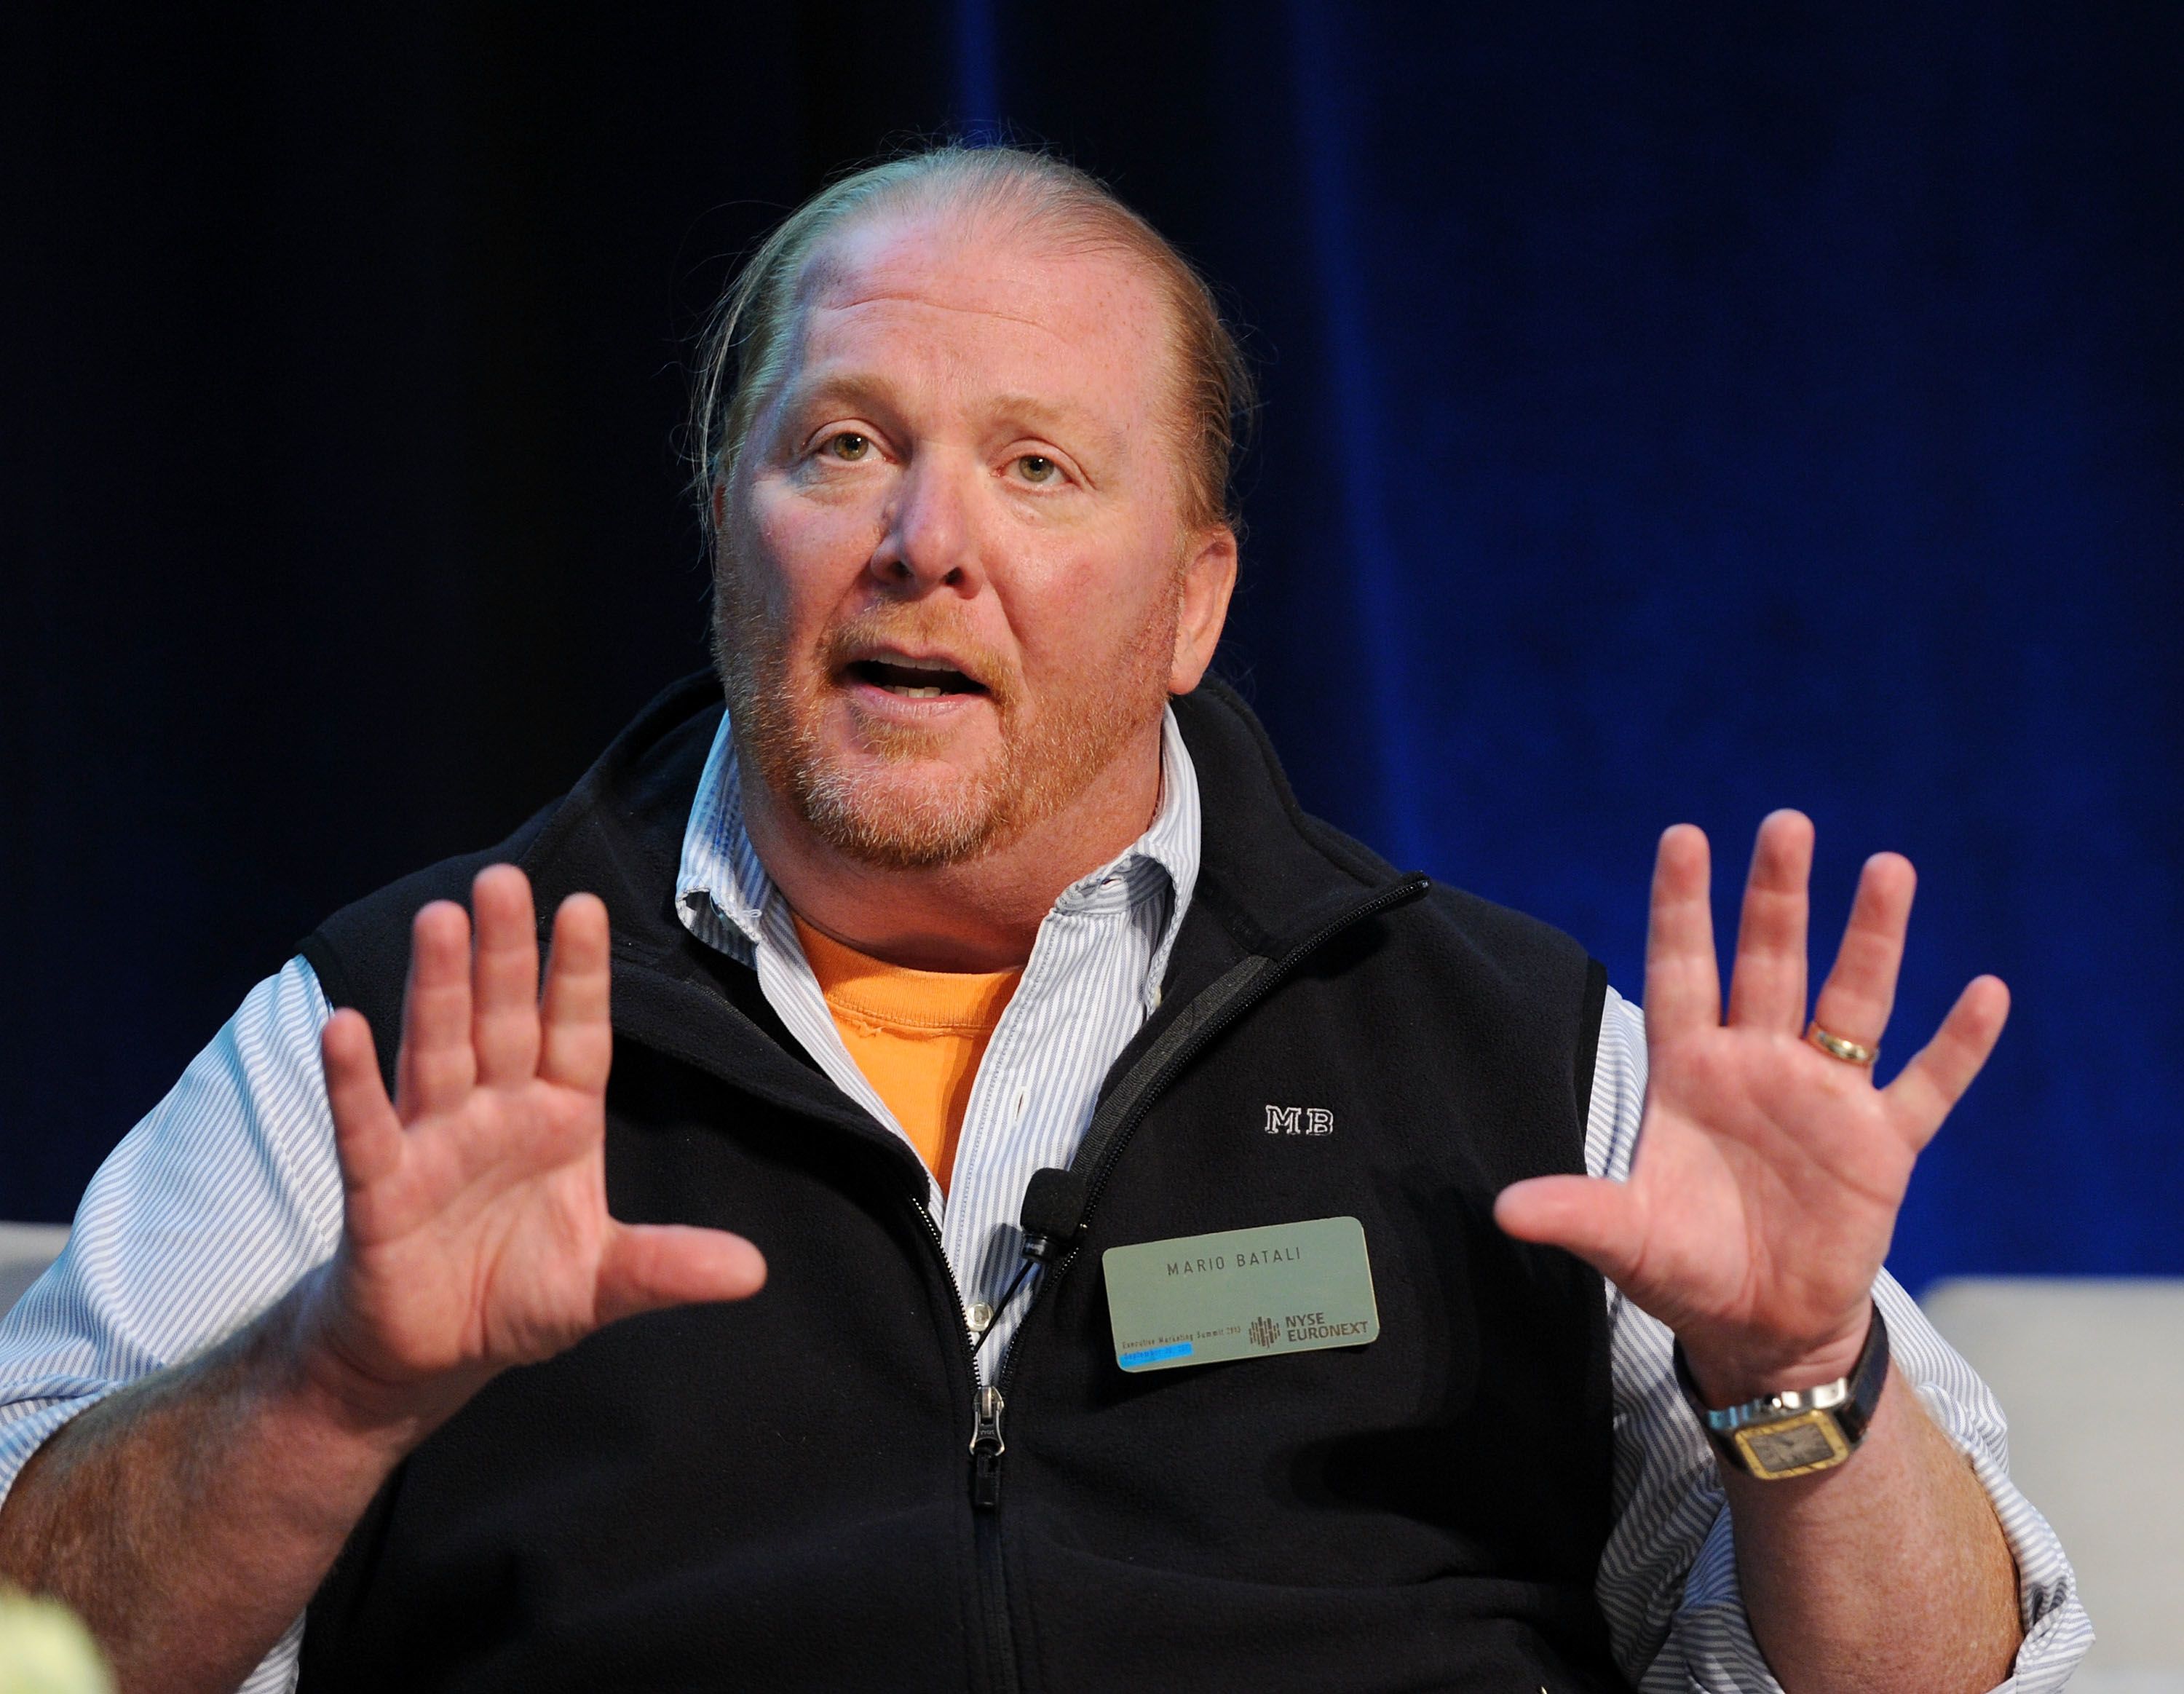 Chef Mario Batali faces criminal charges for sexual misconduct